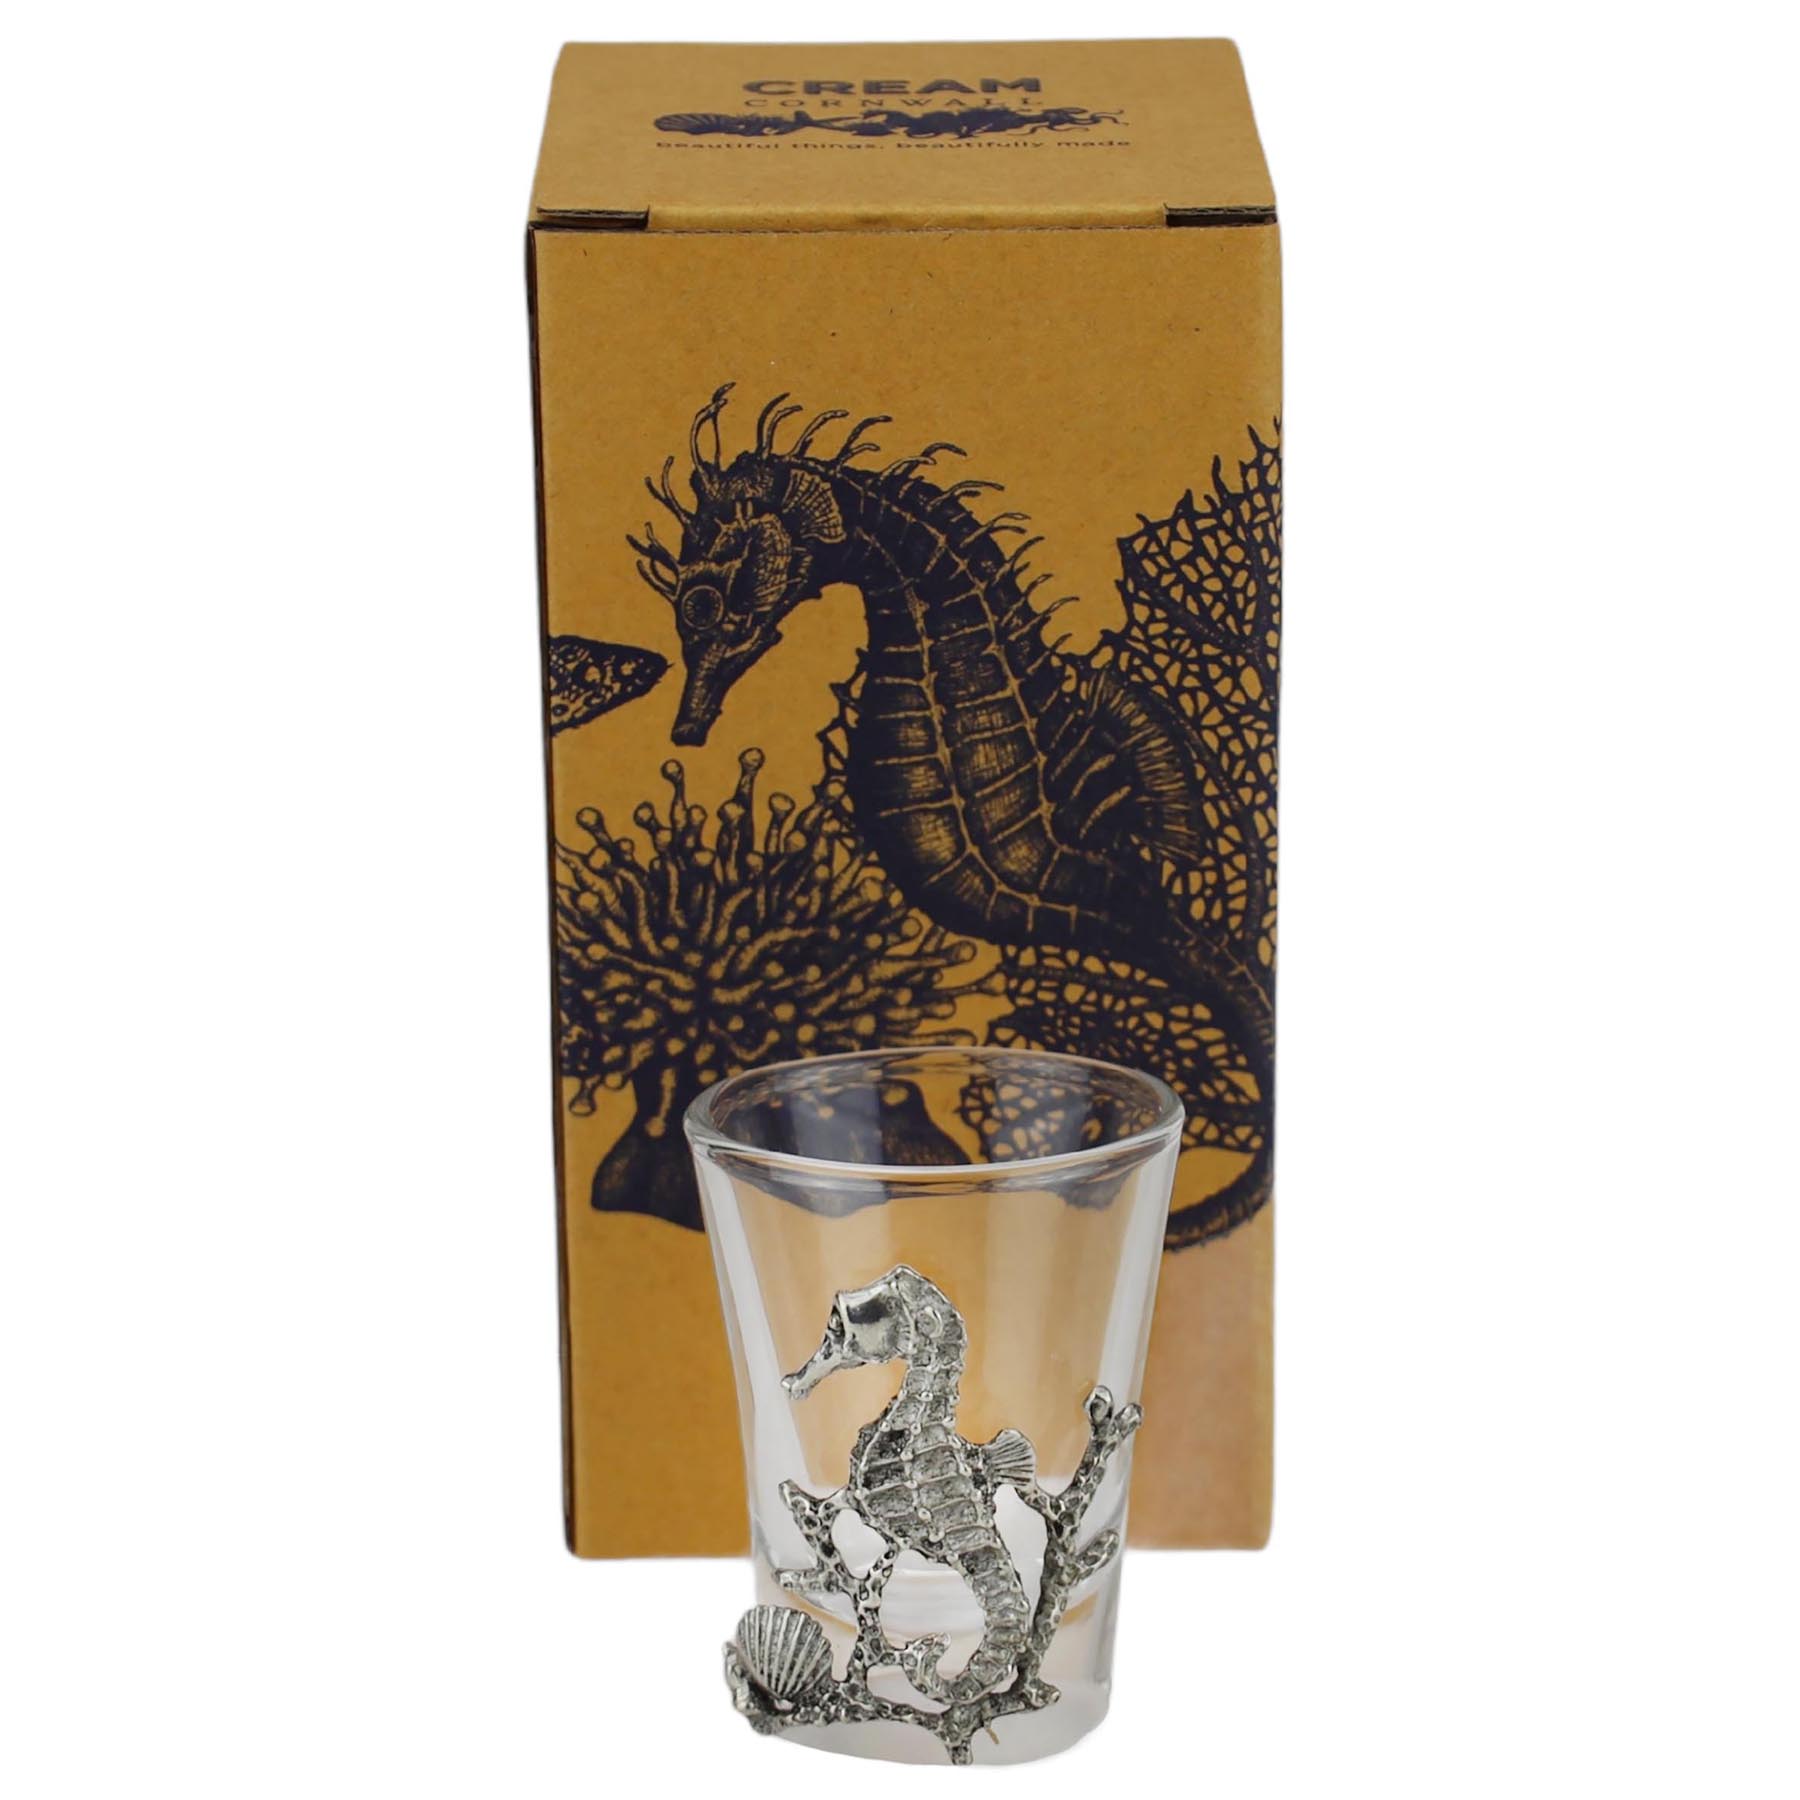 Shot of Pewter Seahorse Shot Glass in front of Product Box 